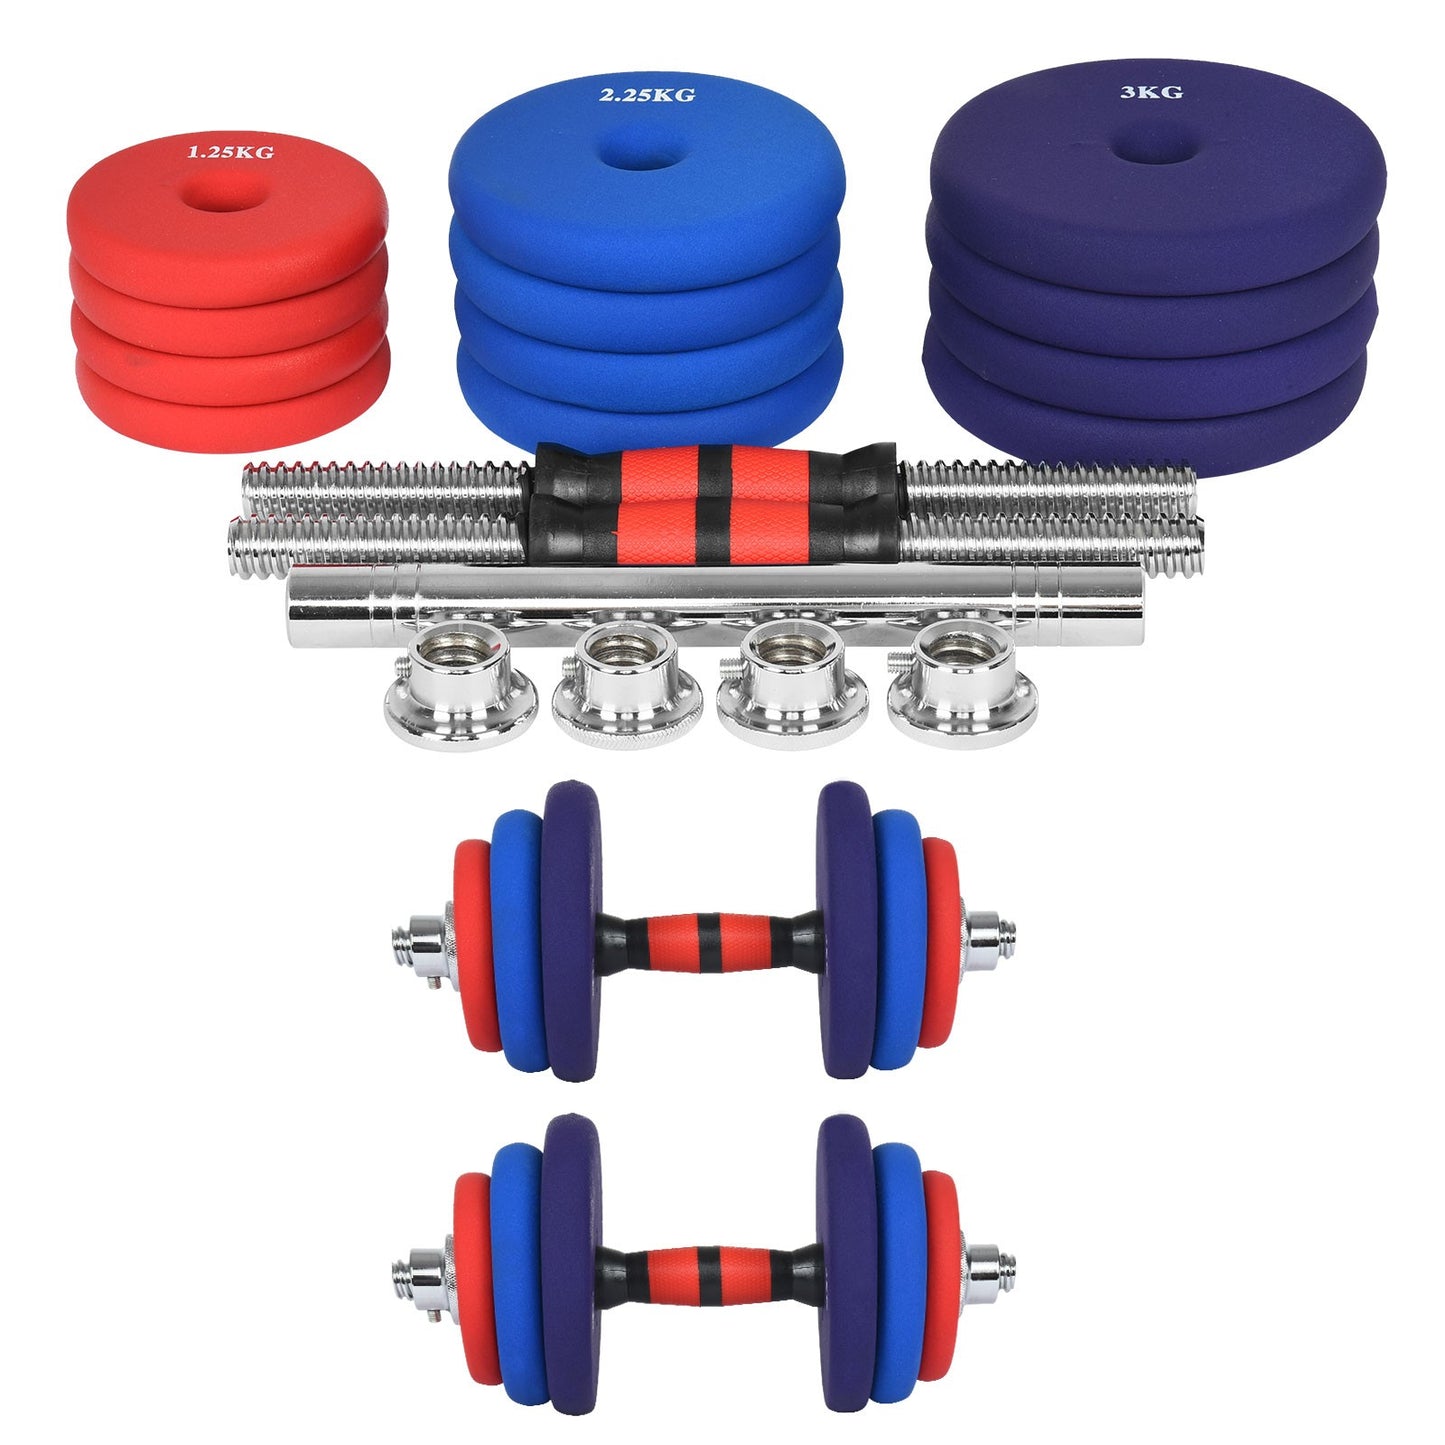 Adjustable Weights Dumbbells Set, Free Weights Set With Connecting Rod 30KG/66LB